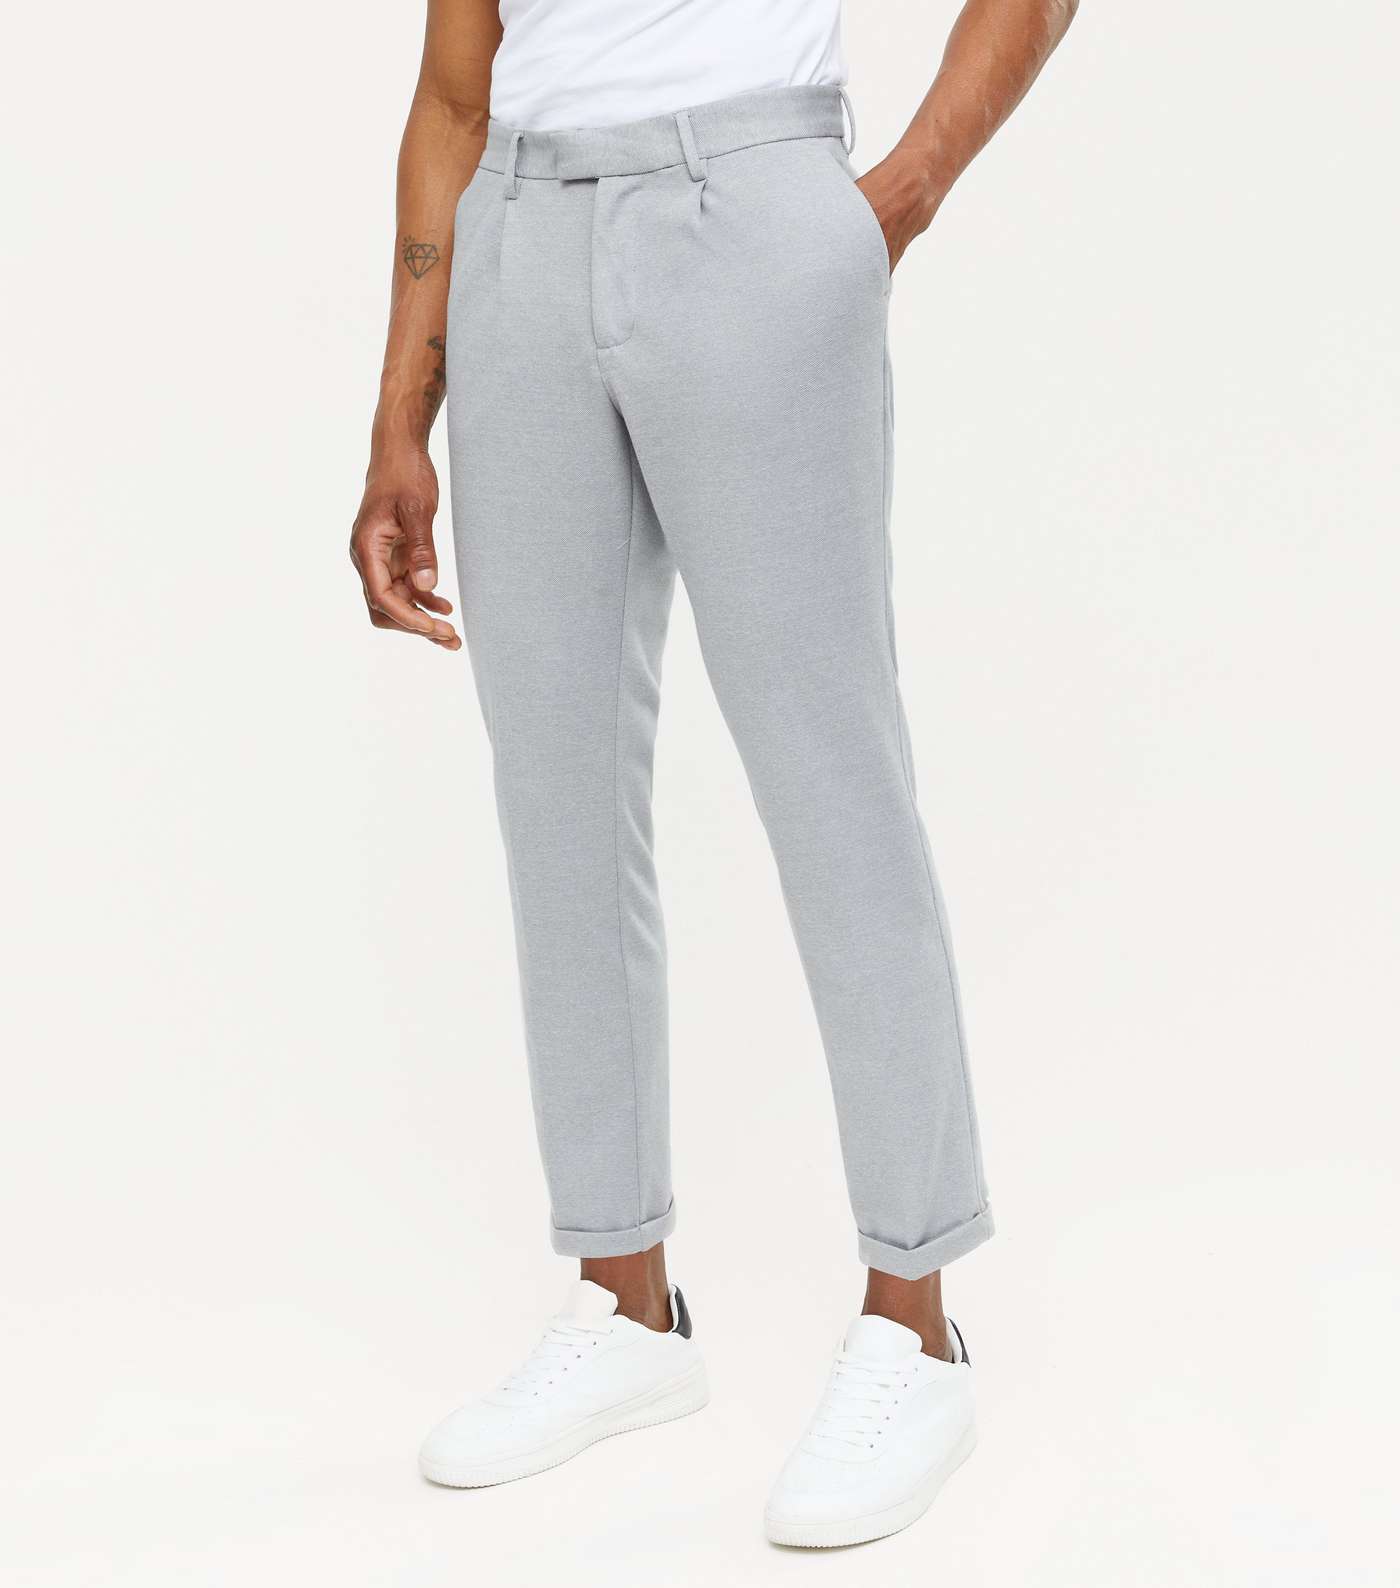 Pale Grey Cuffed Slim Fit Trousers Image 2